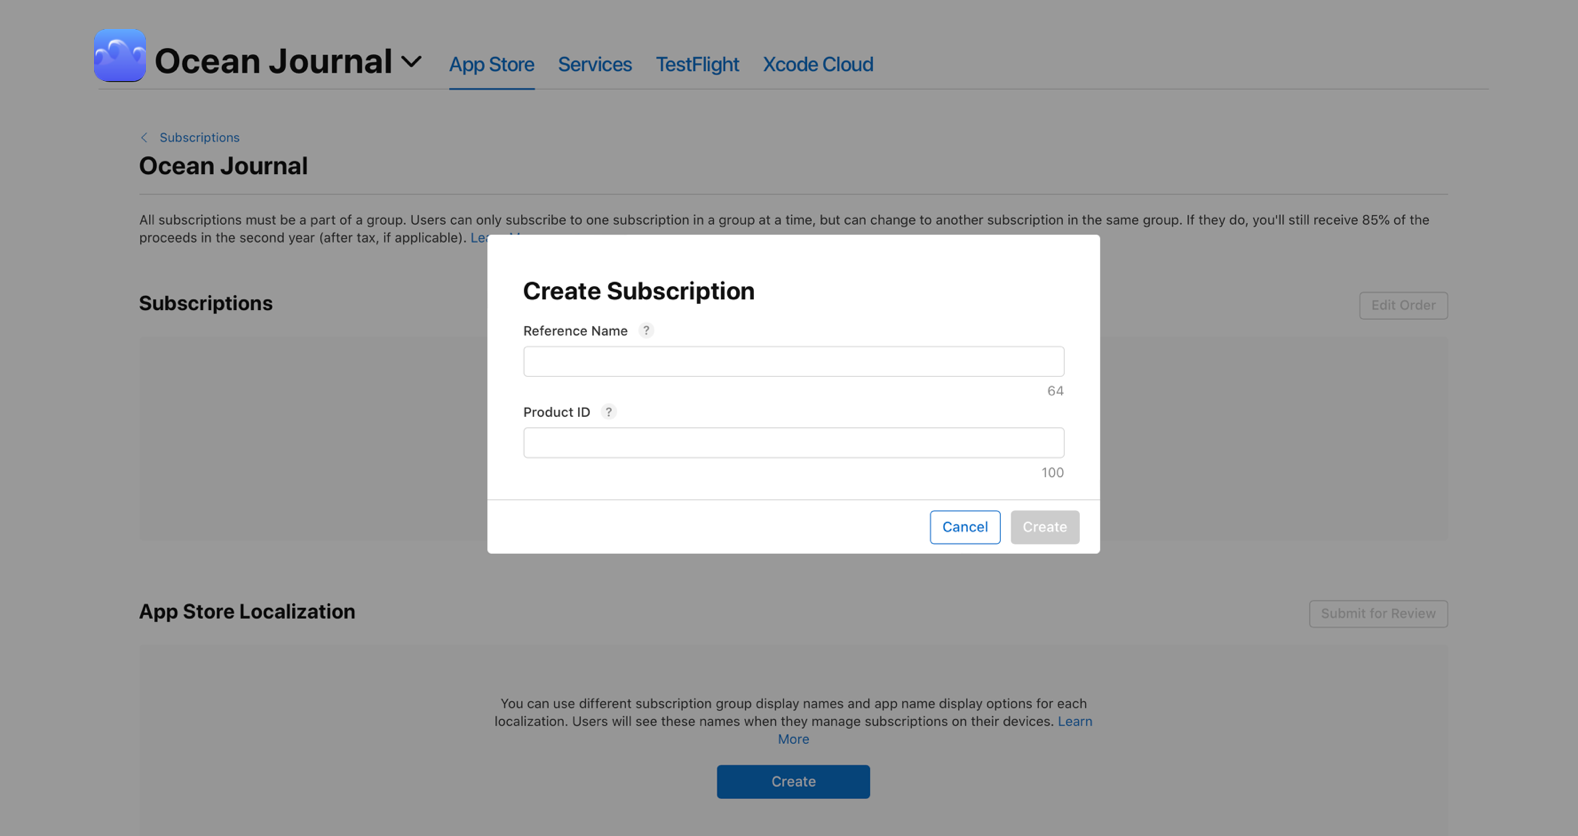 Create Subscription pop-up to name